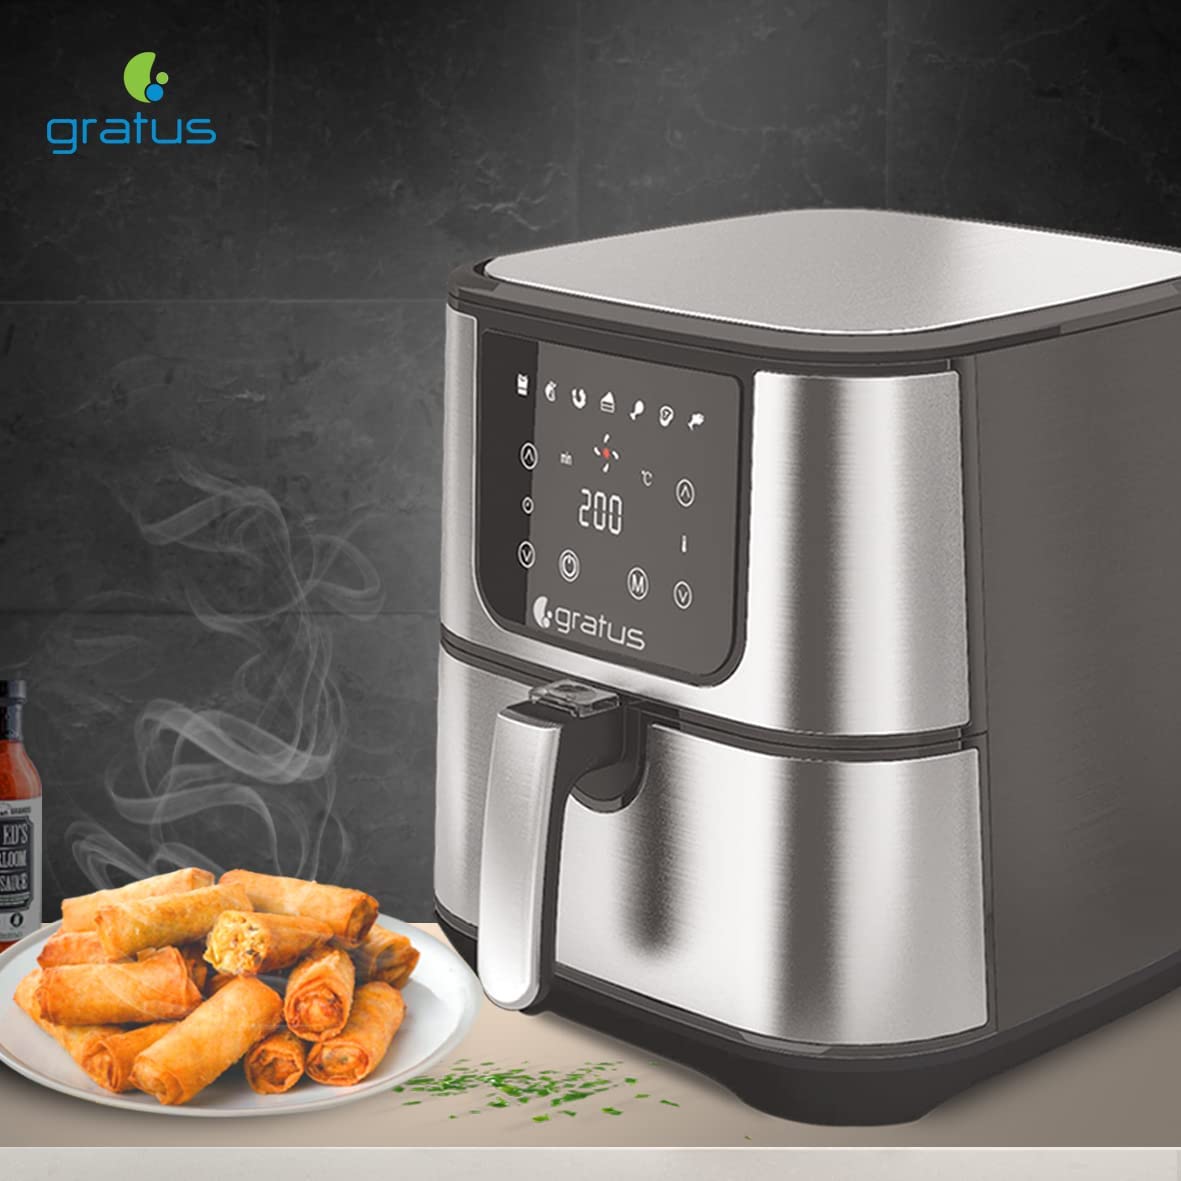 Gratus Air Fryer , 2 Year warranty , Overheating Protection Function Inbuilt , The healthy Airfyer which leads you to Oil free ,Low fat cooking. 5.5LCapacity, Digital Display ,1800 W